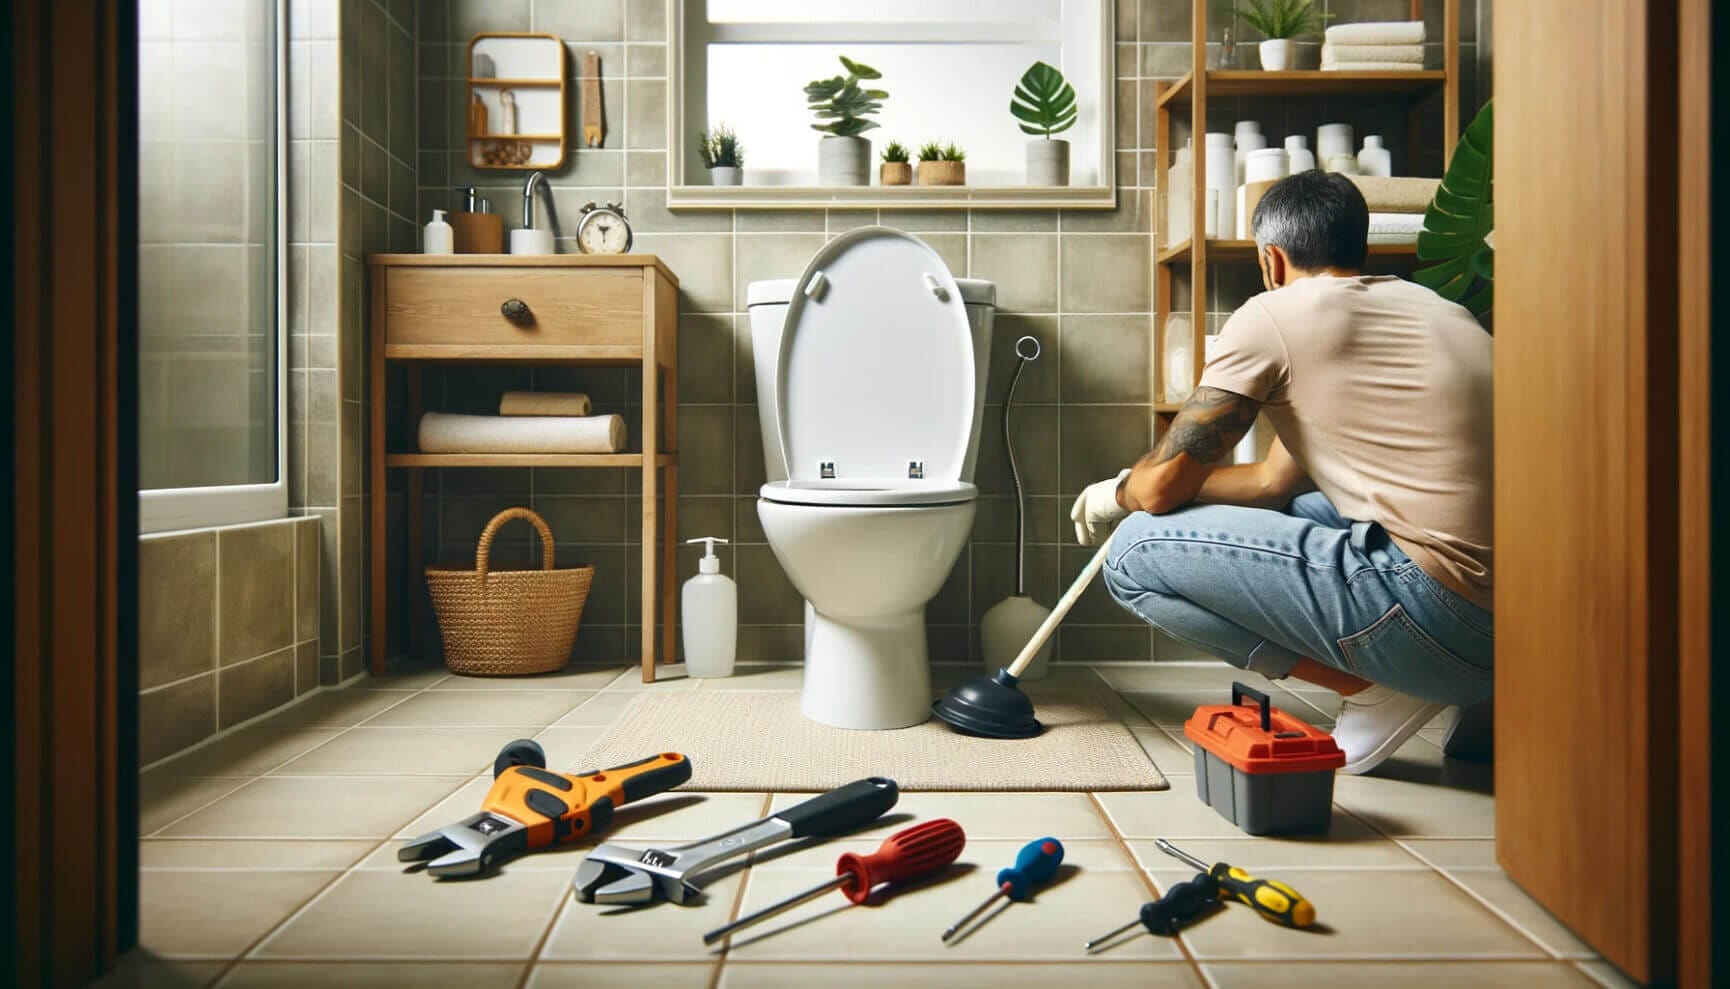 A man is kneeling in front of a toilet with tools.